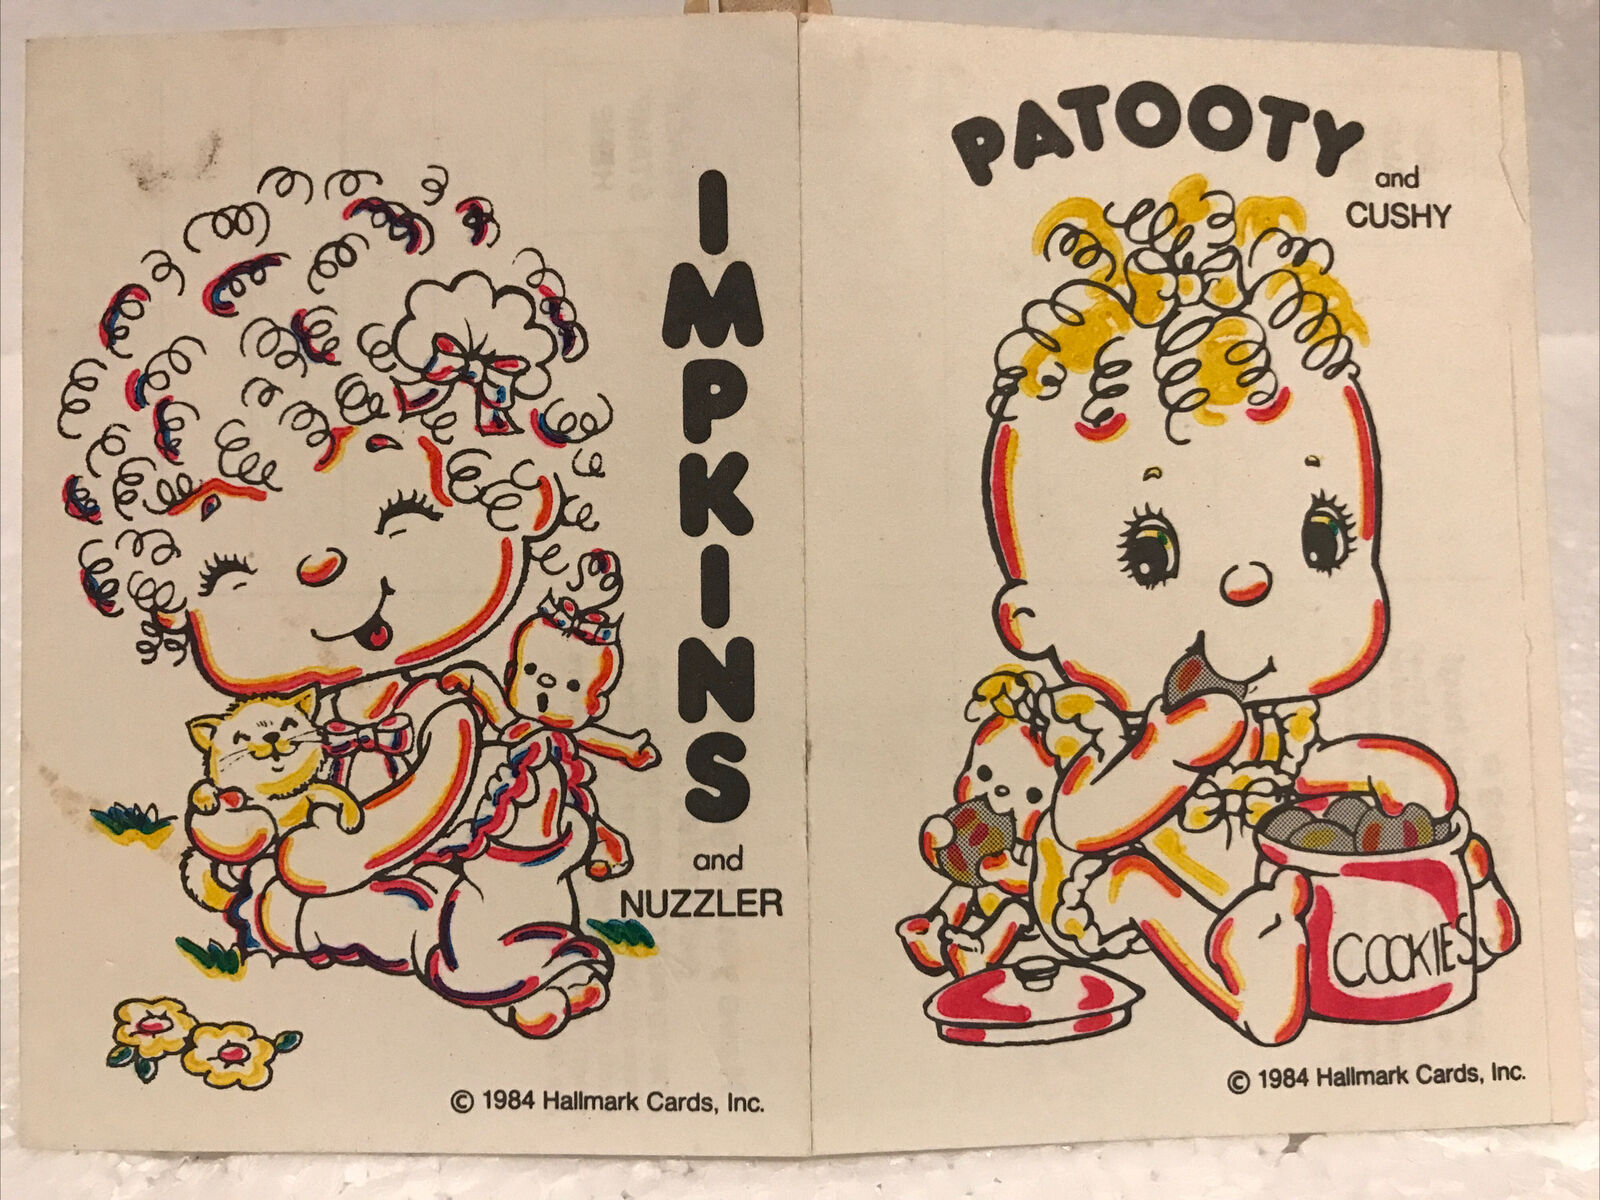 Vintage Hallmark Postcard- Impkins and Nuzzler and Patooty and Cushy c. 1984